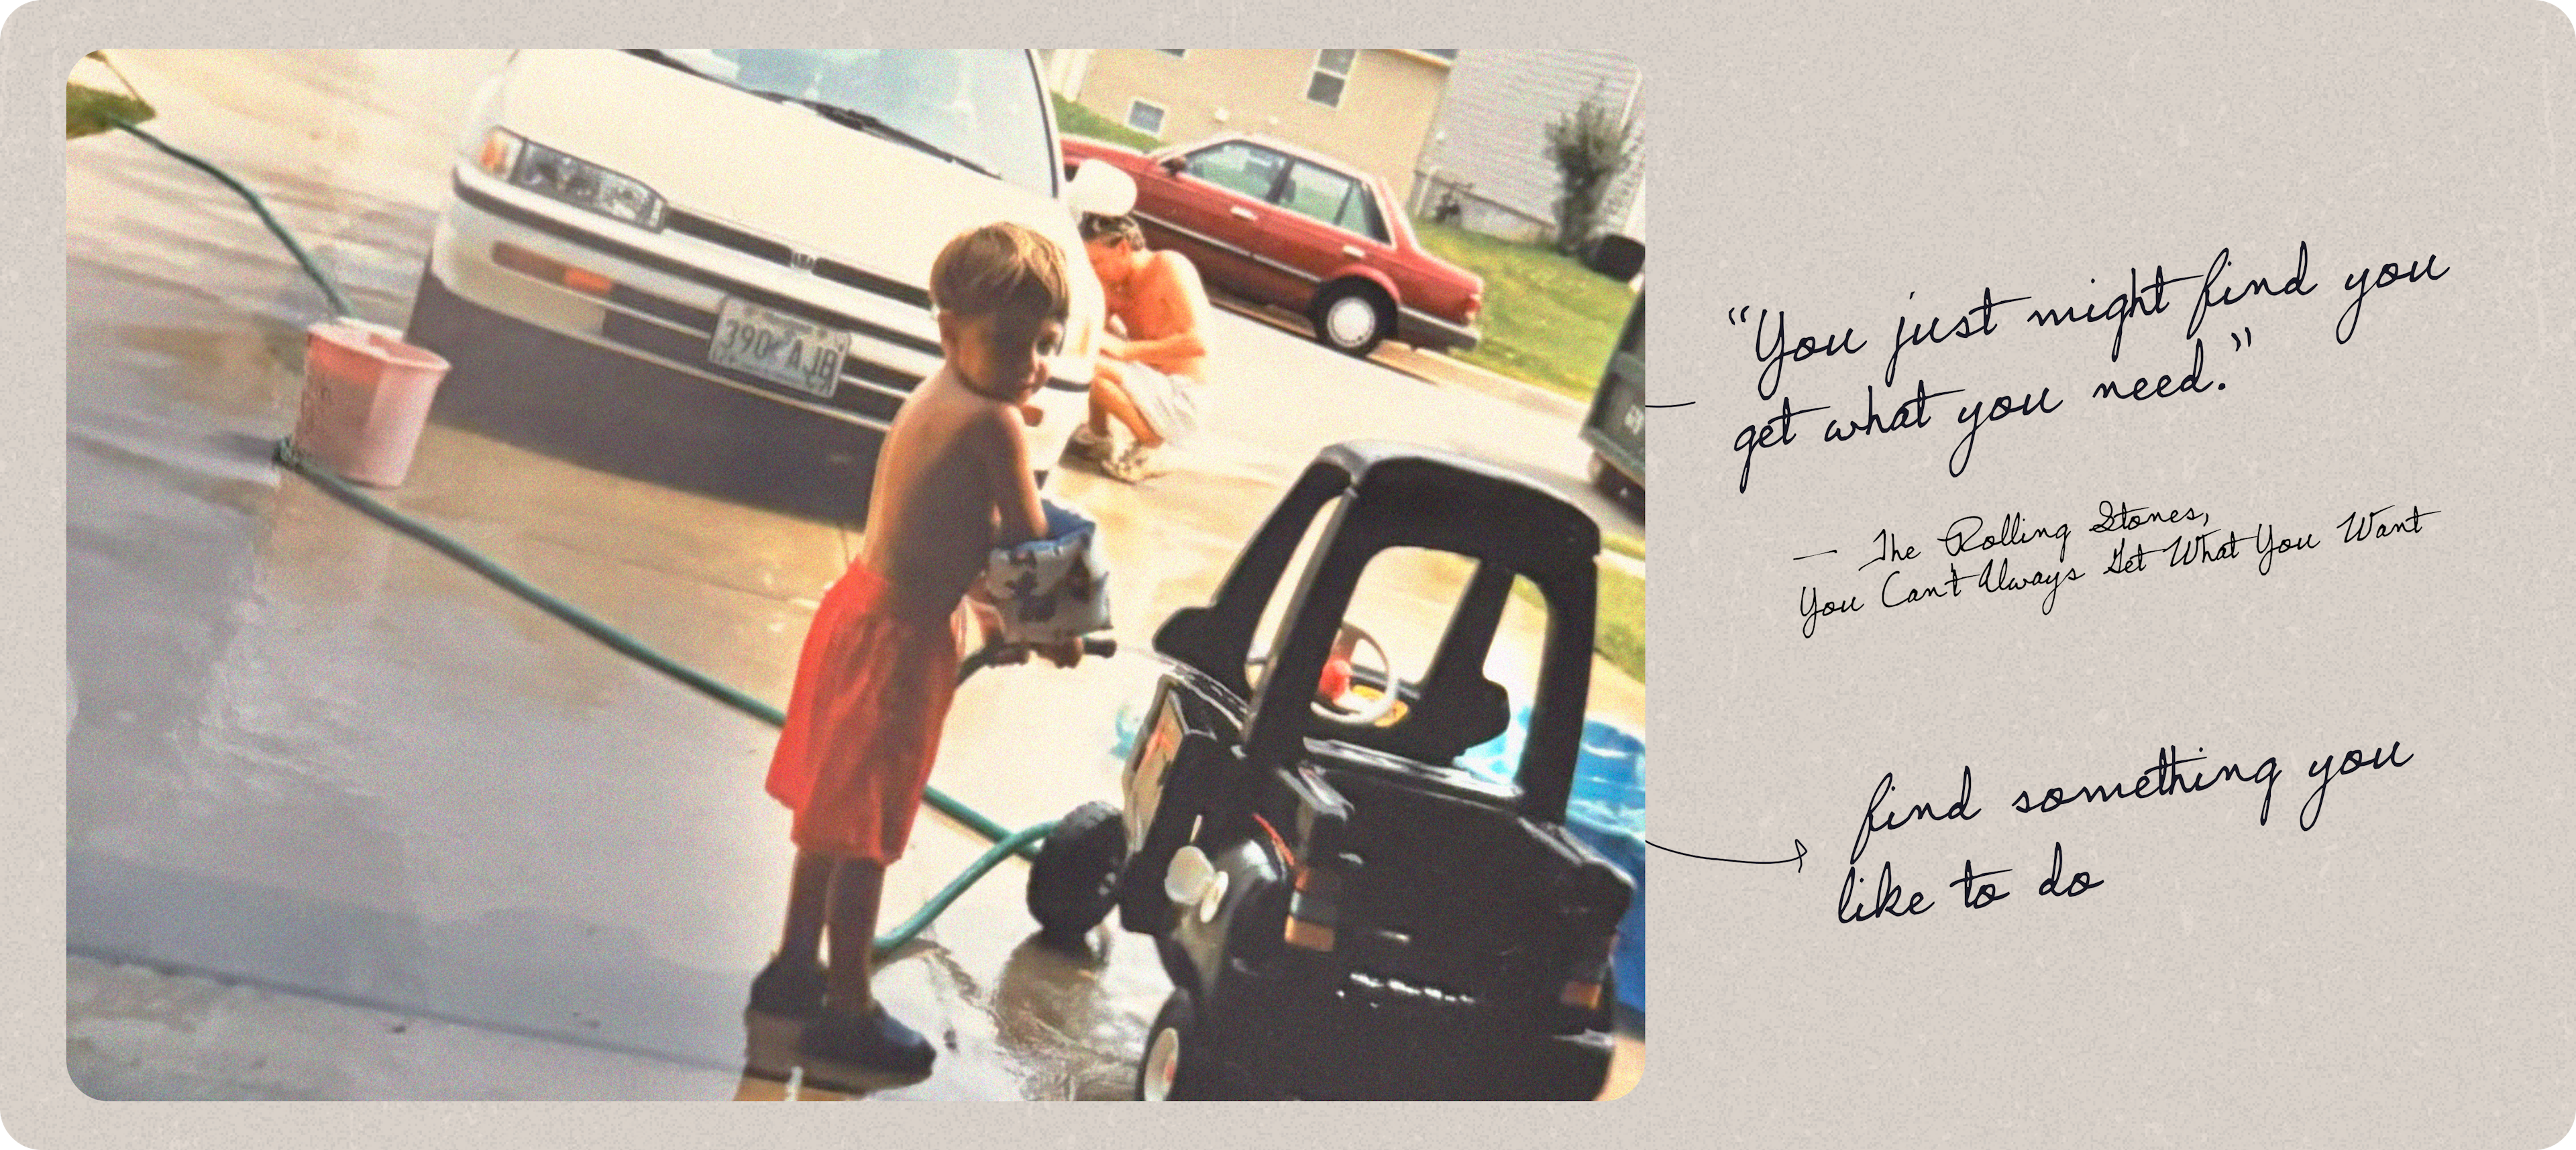 Archival family photograph of a young Tyler Denk washing car with his dad in the background and handwritten notes and Rolling Stones lyrics on the side | Memory Bank: Tyler Denk, co-founder and CEO of Beehiiv | Mercury